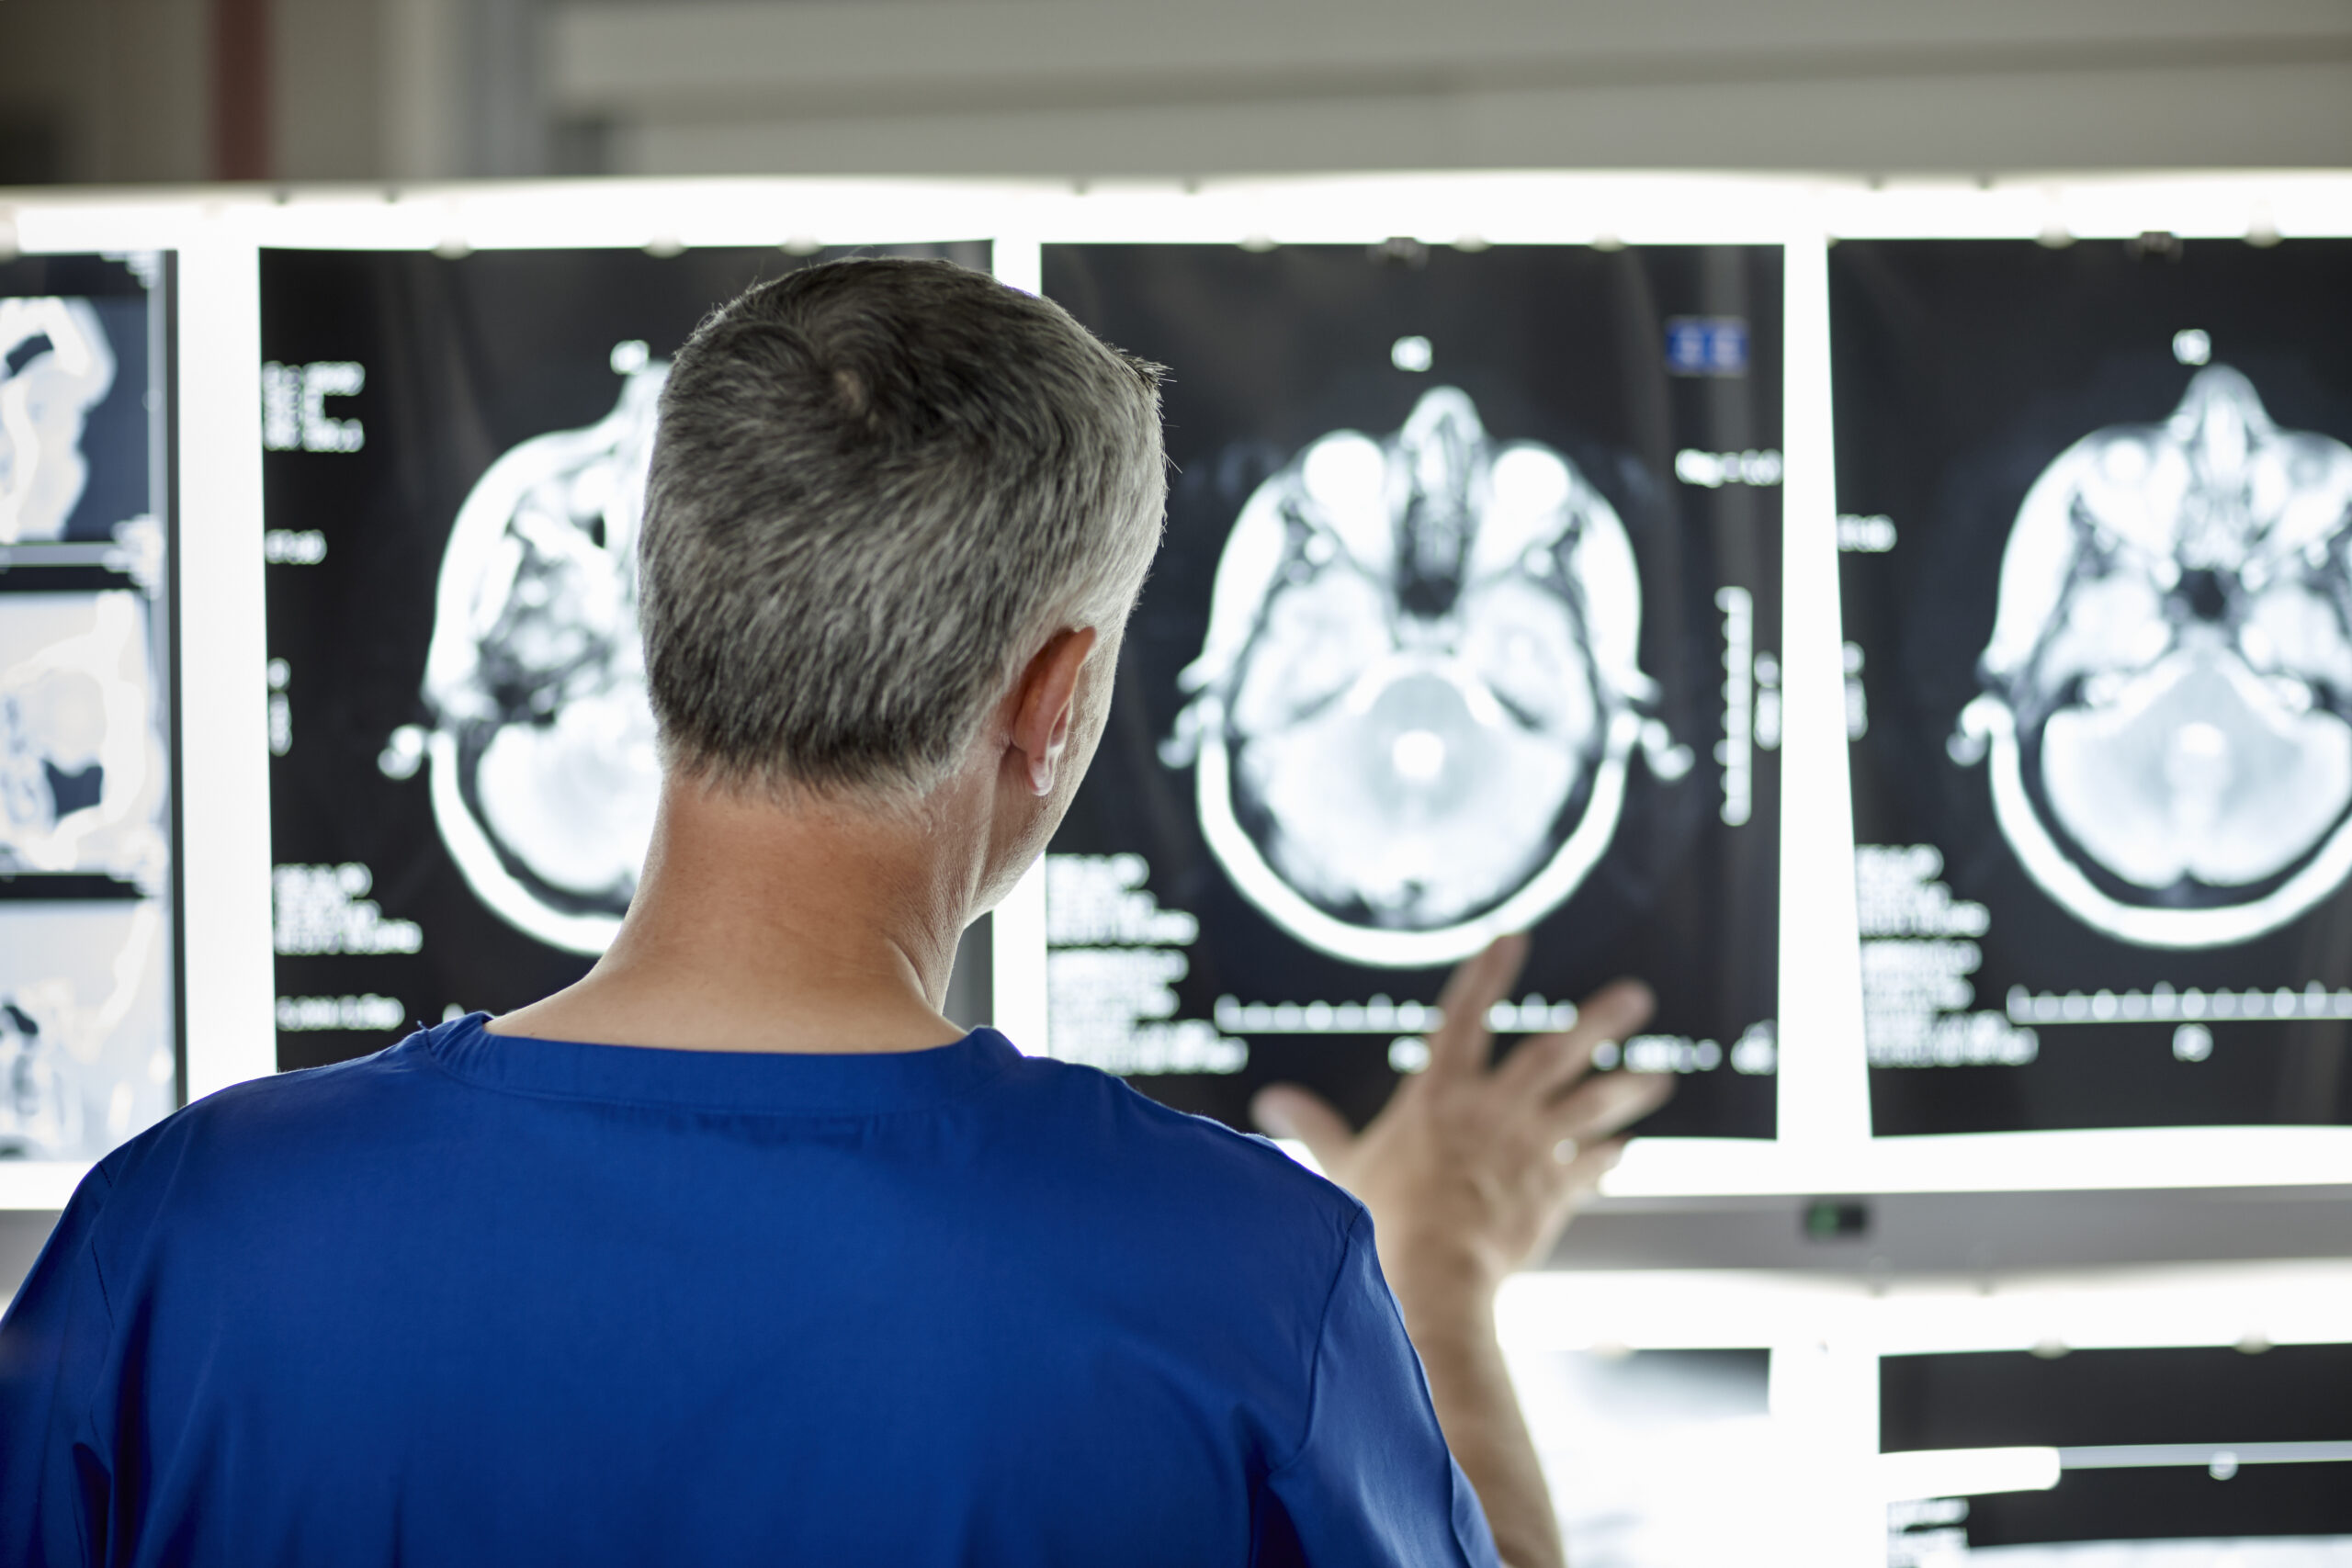 A doctor wearing a blue scrub with one of his hands placed on a screen with x-ray images of a human brain